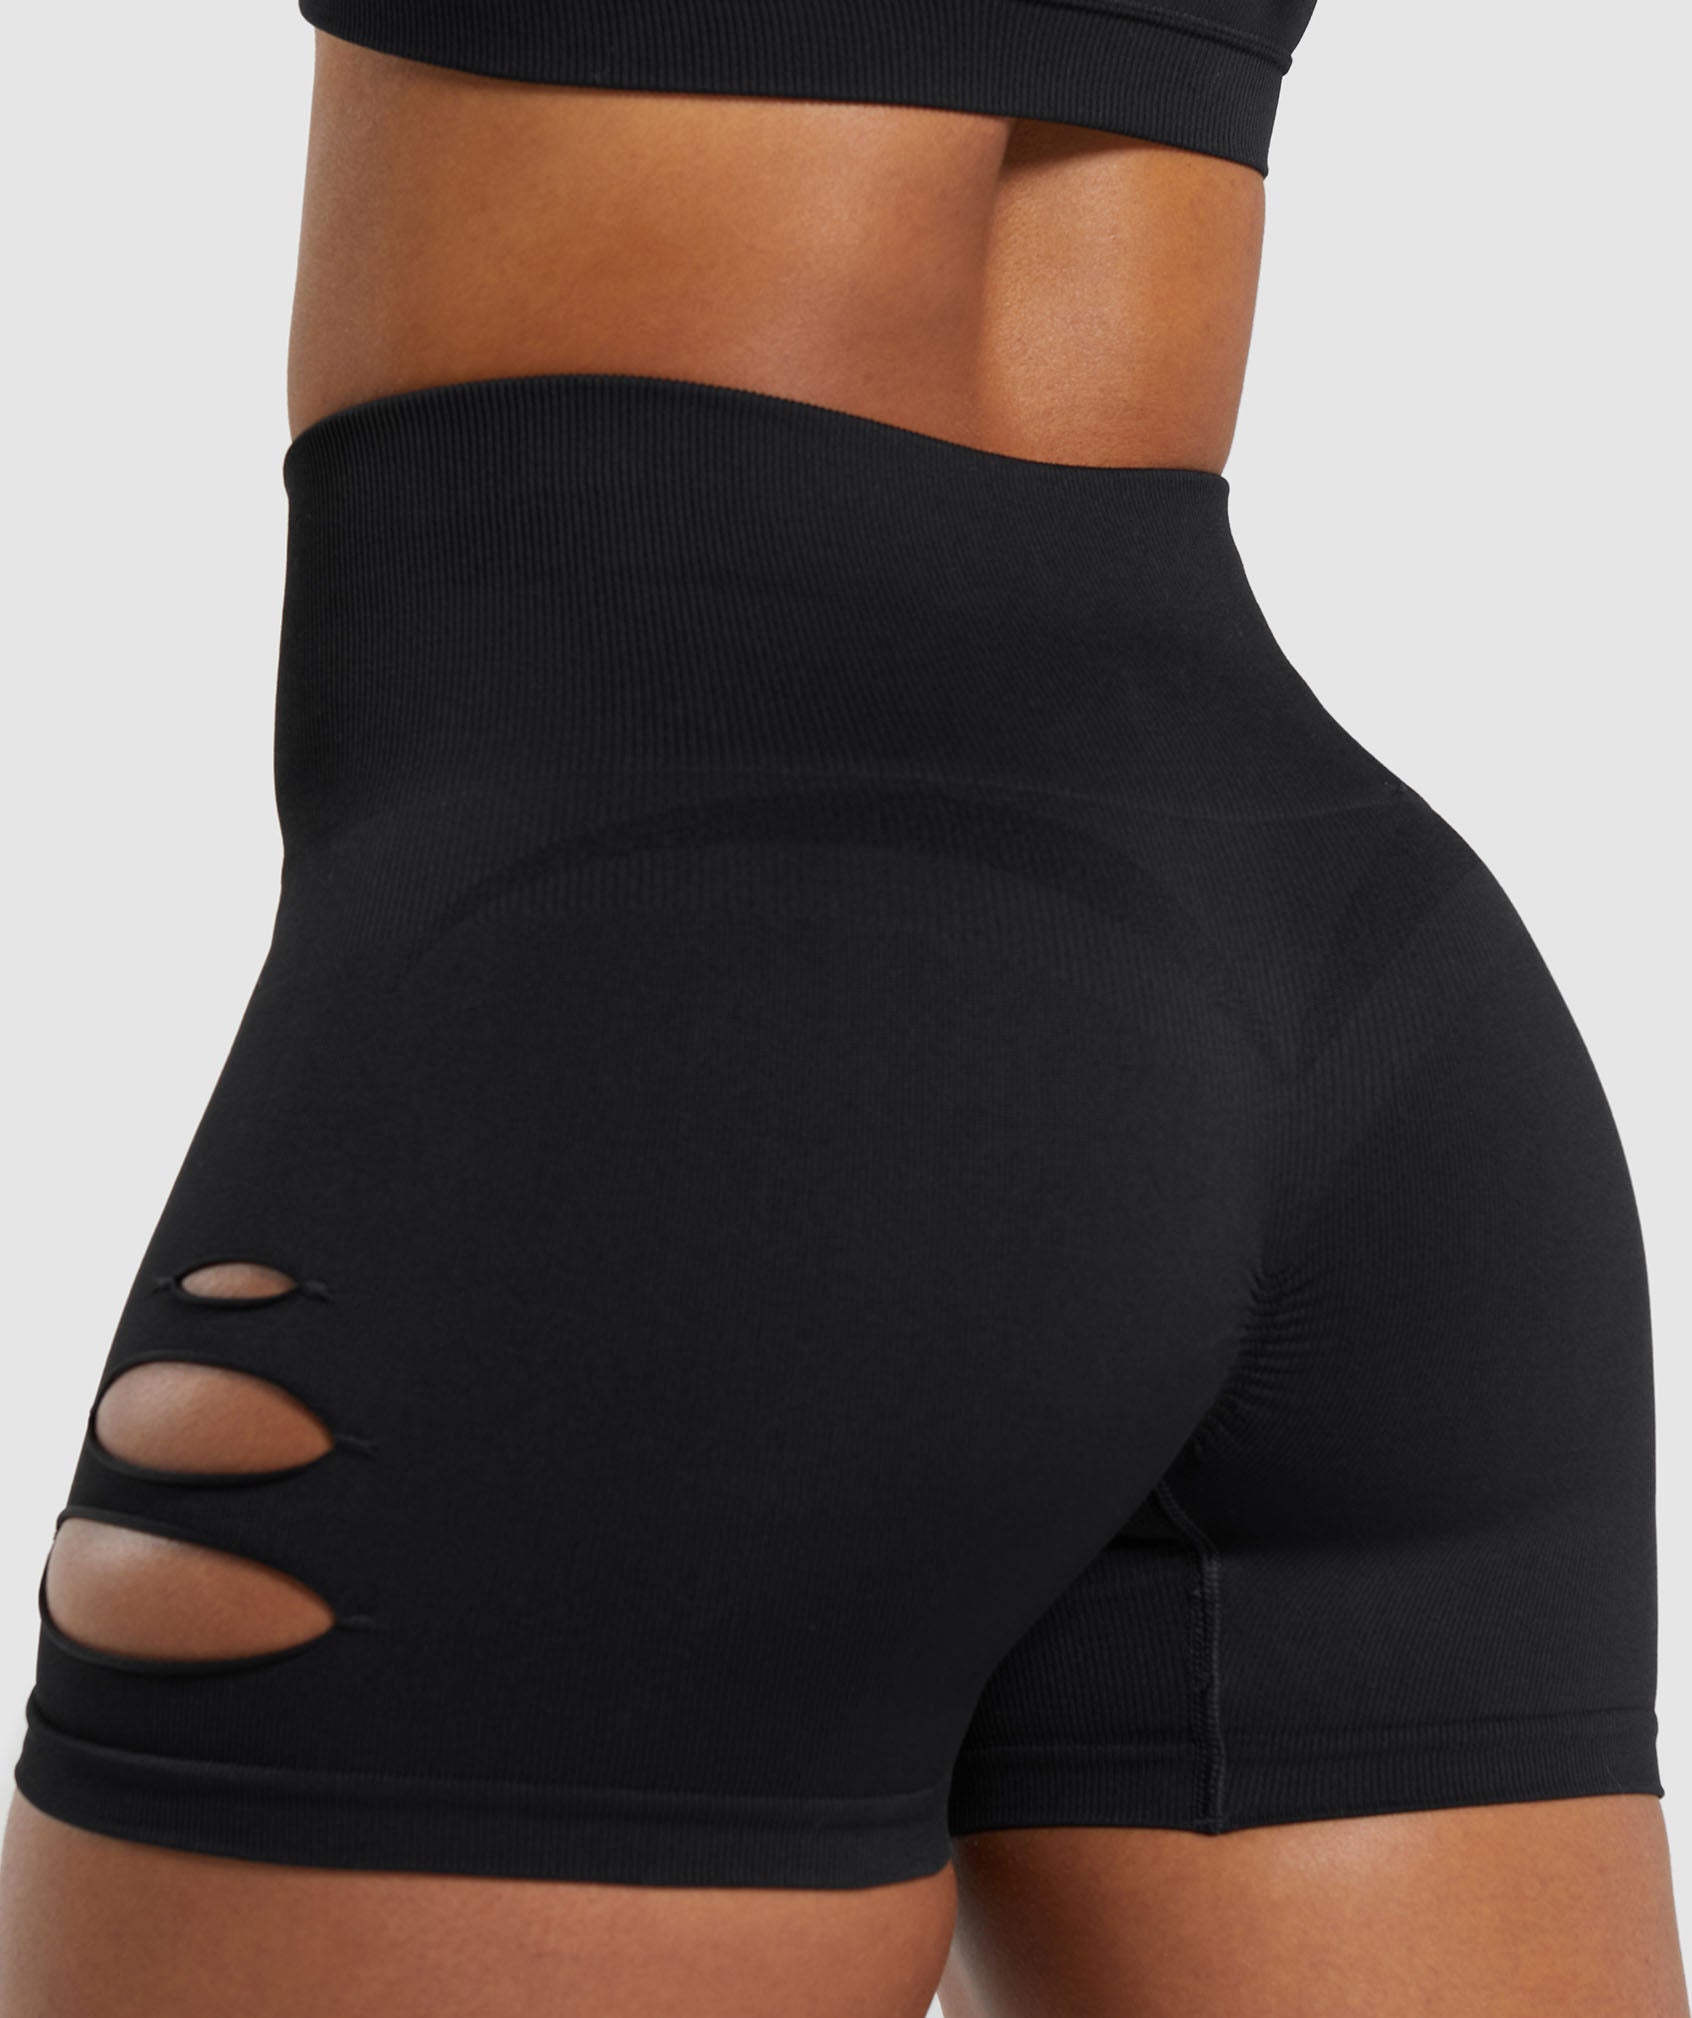 Gains Seamless Ripped Shorts in Black - view 7